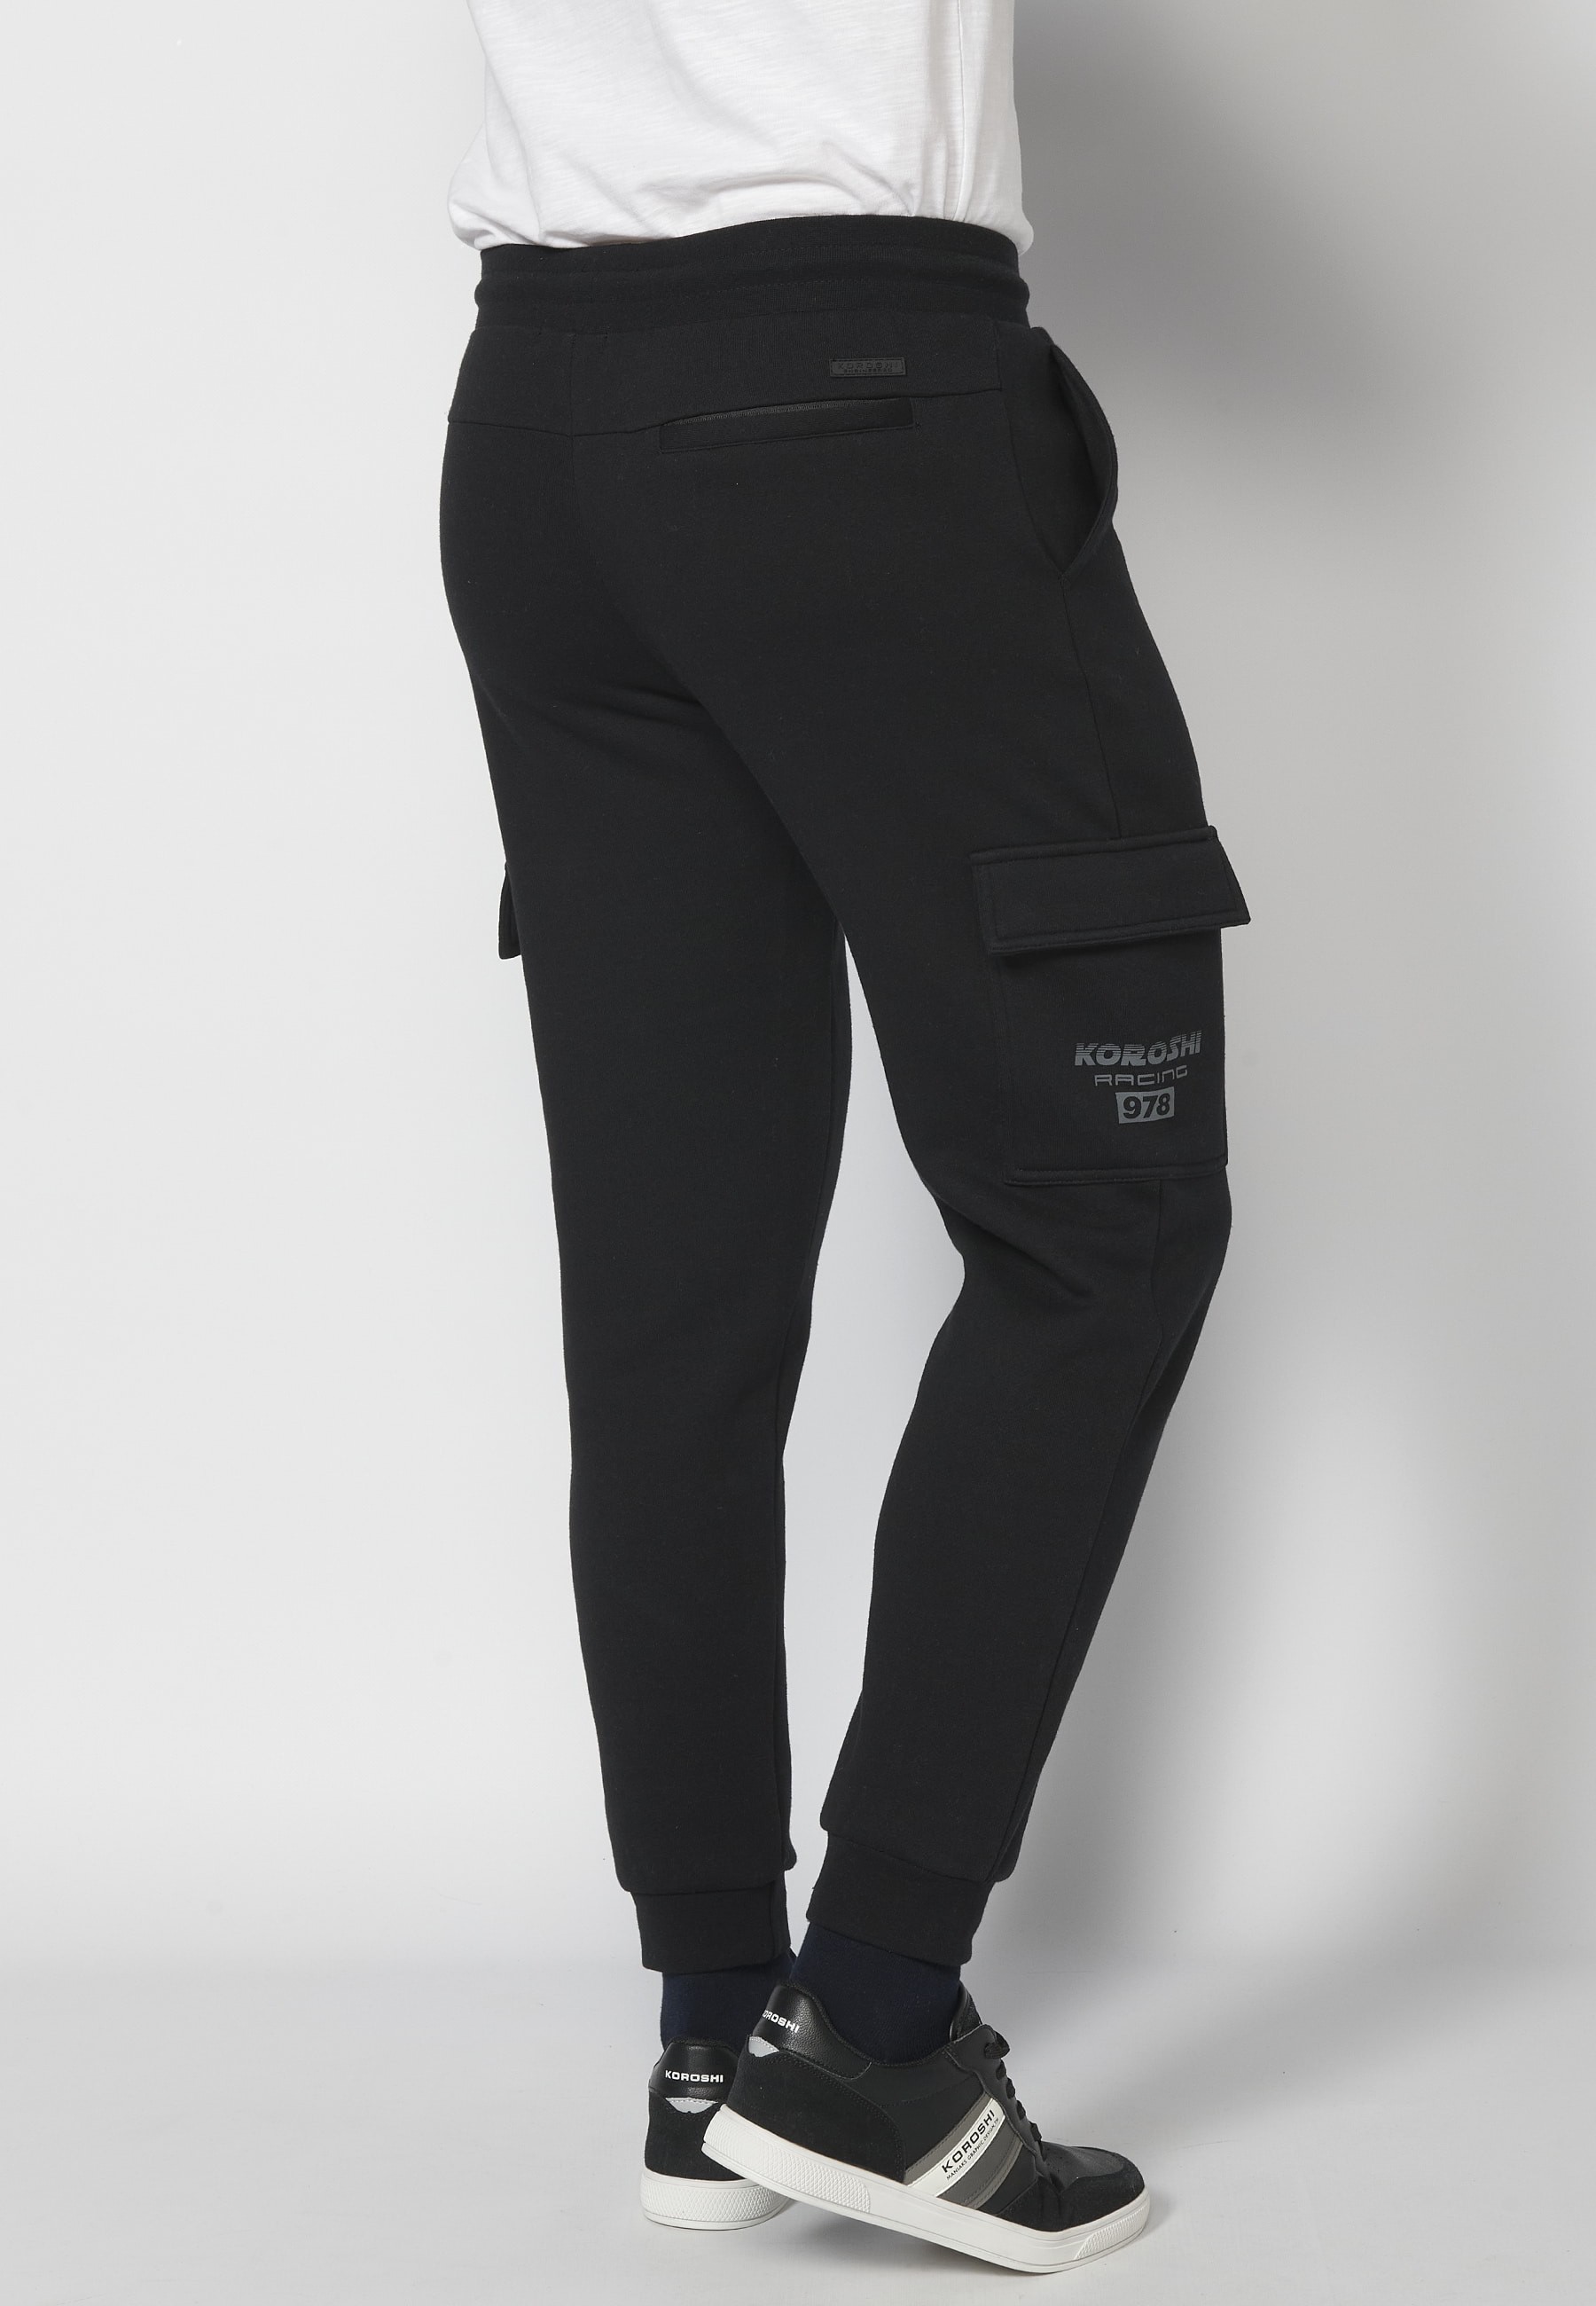 Long jogger pants with adjustable elastic waist and side pockets in Black for Men